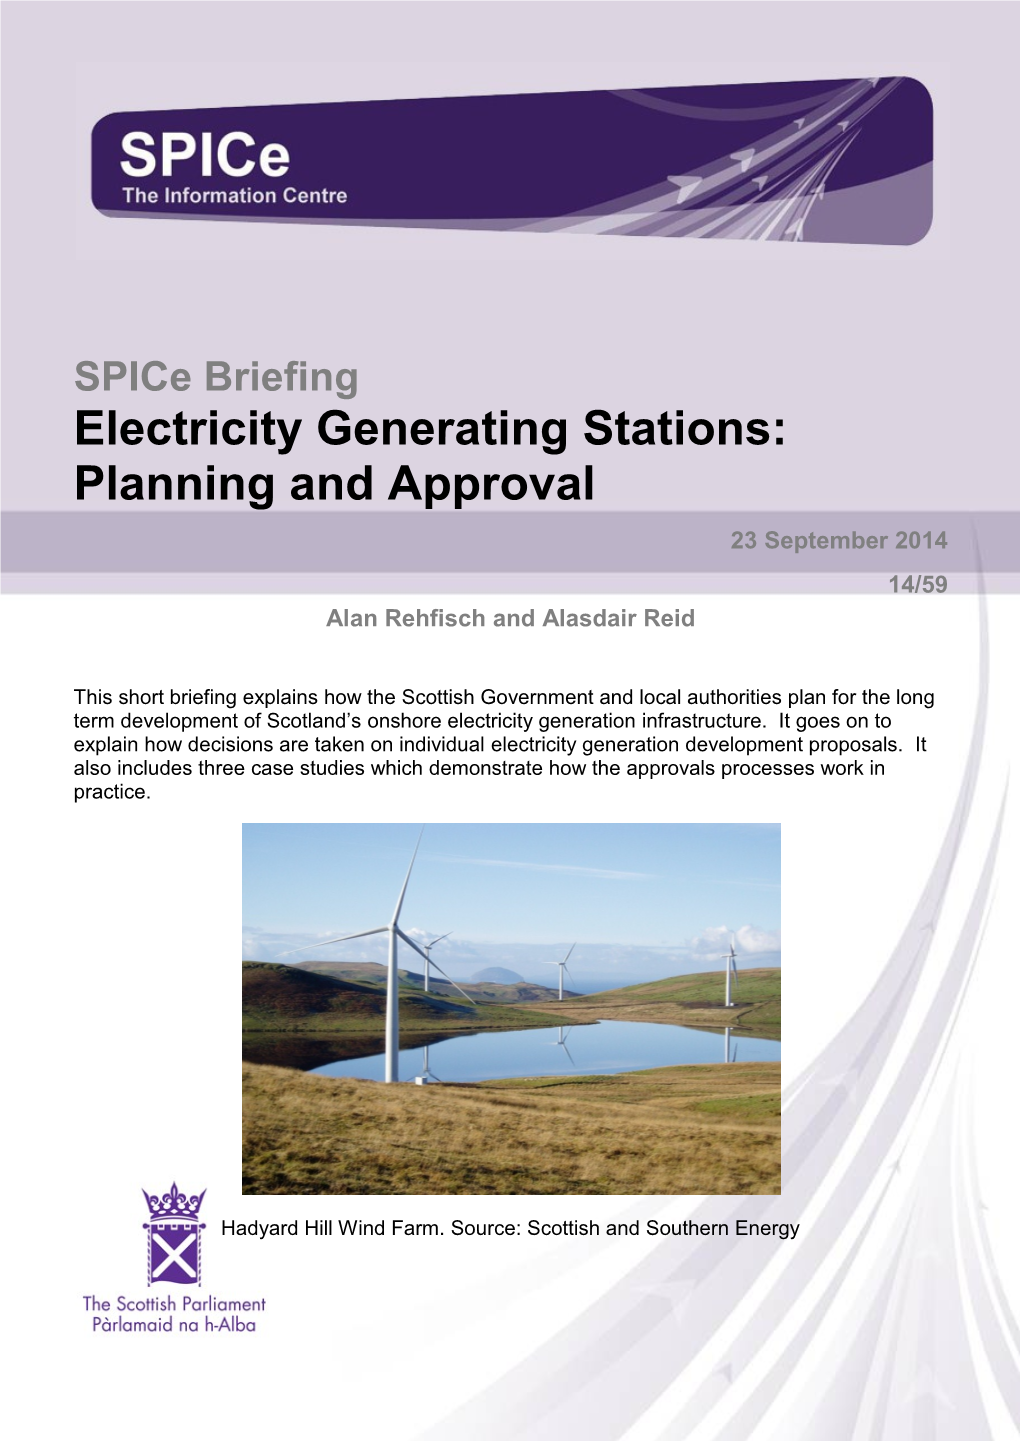 Spice Briefing Electricity Generating Stations: Planning and Approval 23 September 2014 14/59 Alan Rehfisch and Alasdair Reid